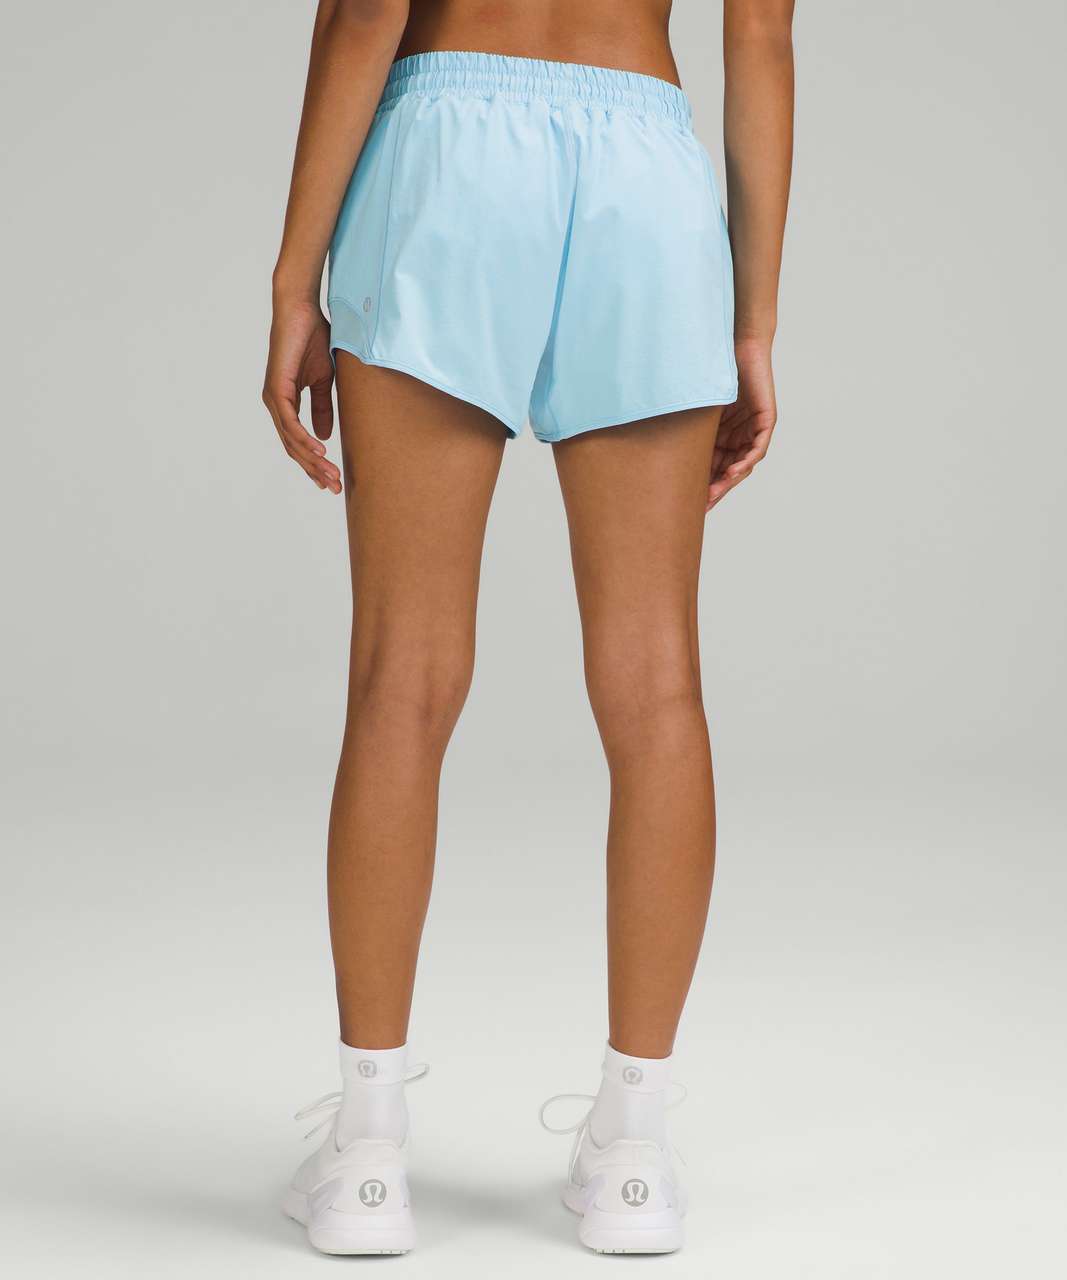 Lululemon Hotty Hot High-rise Lined Shorts 2.5 In Symphony Blue